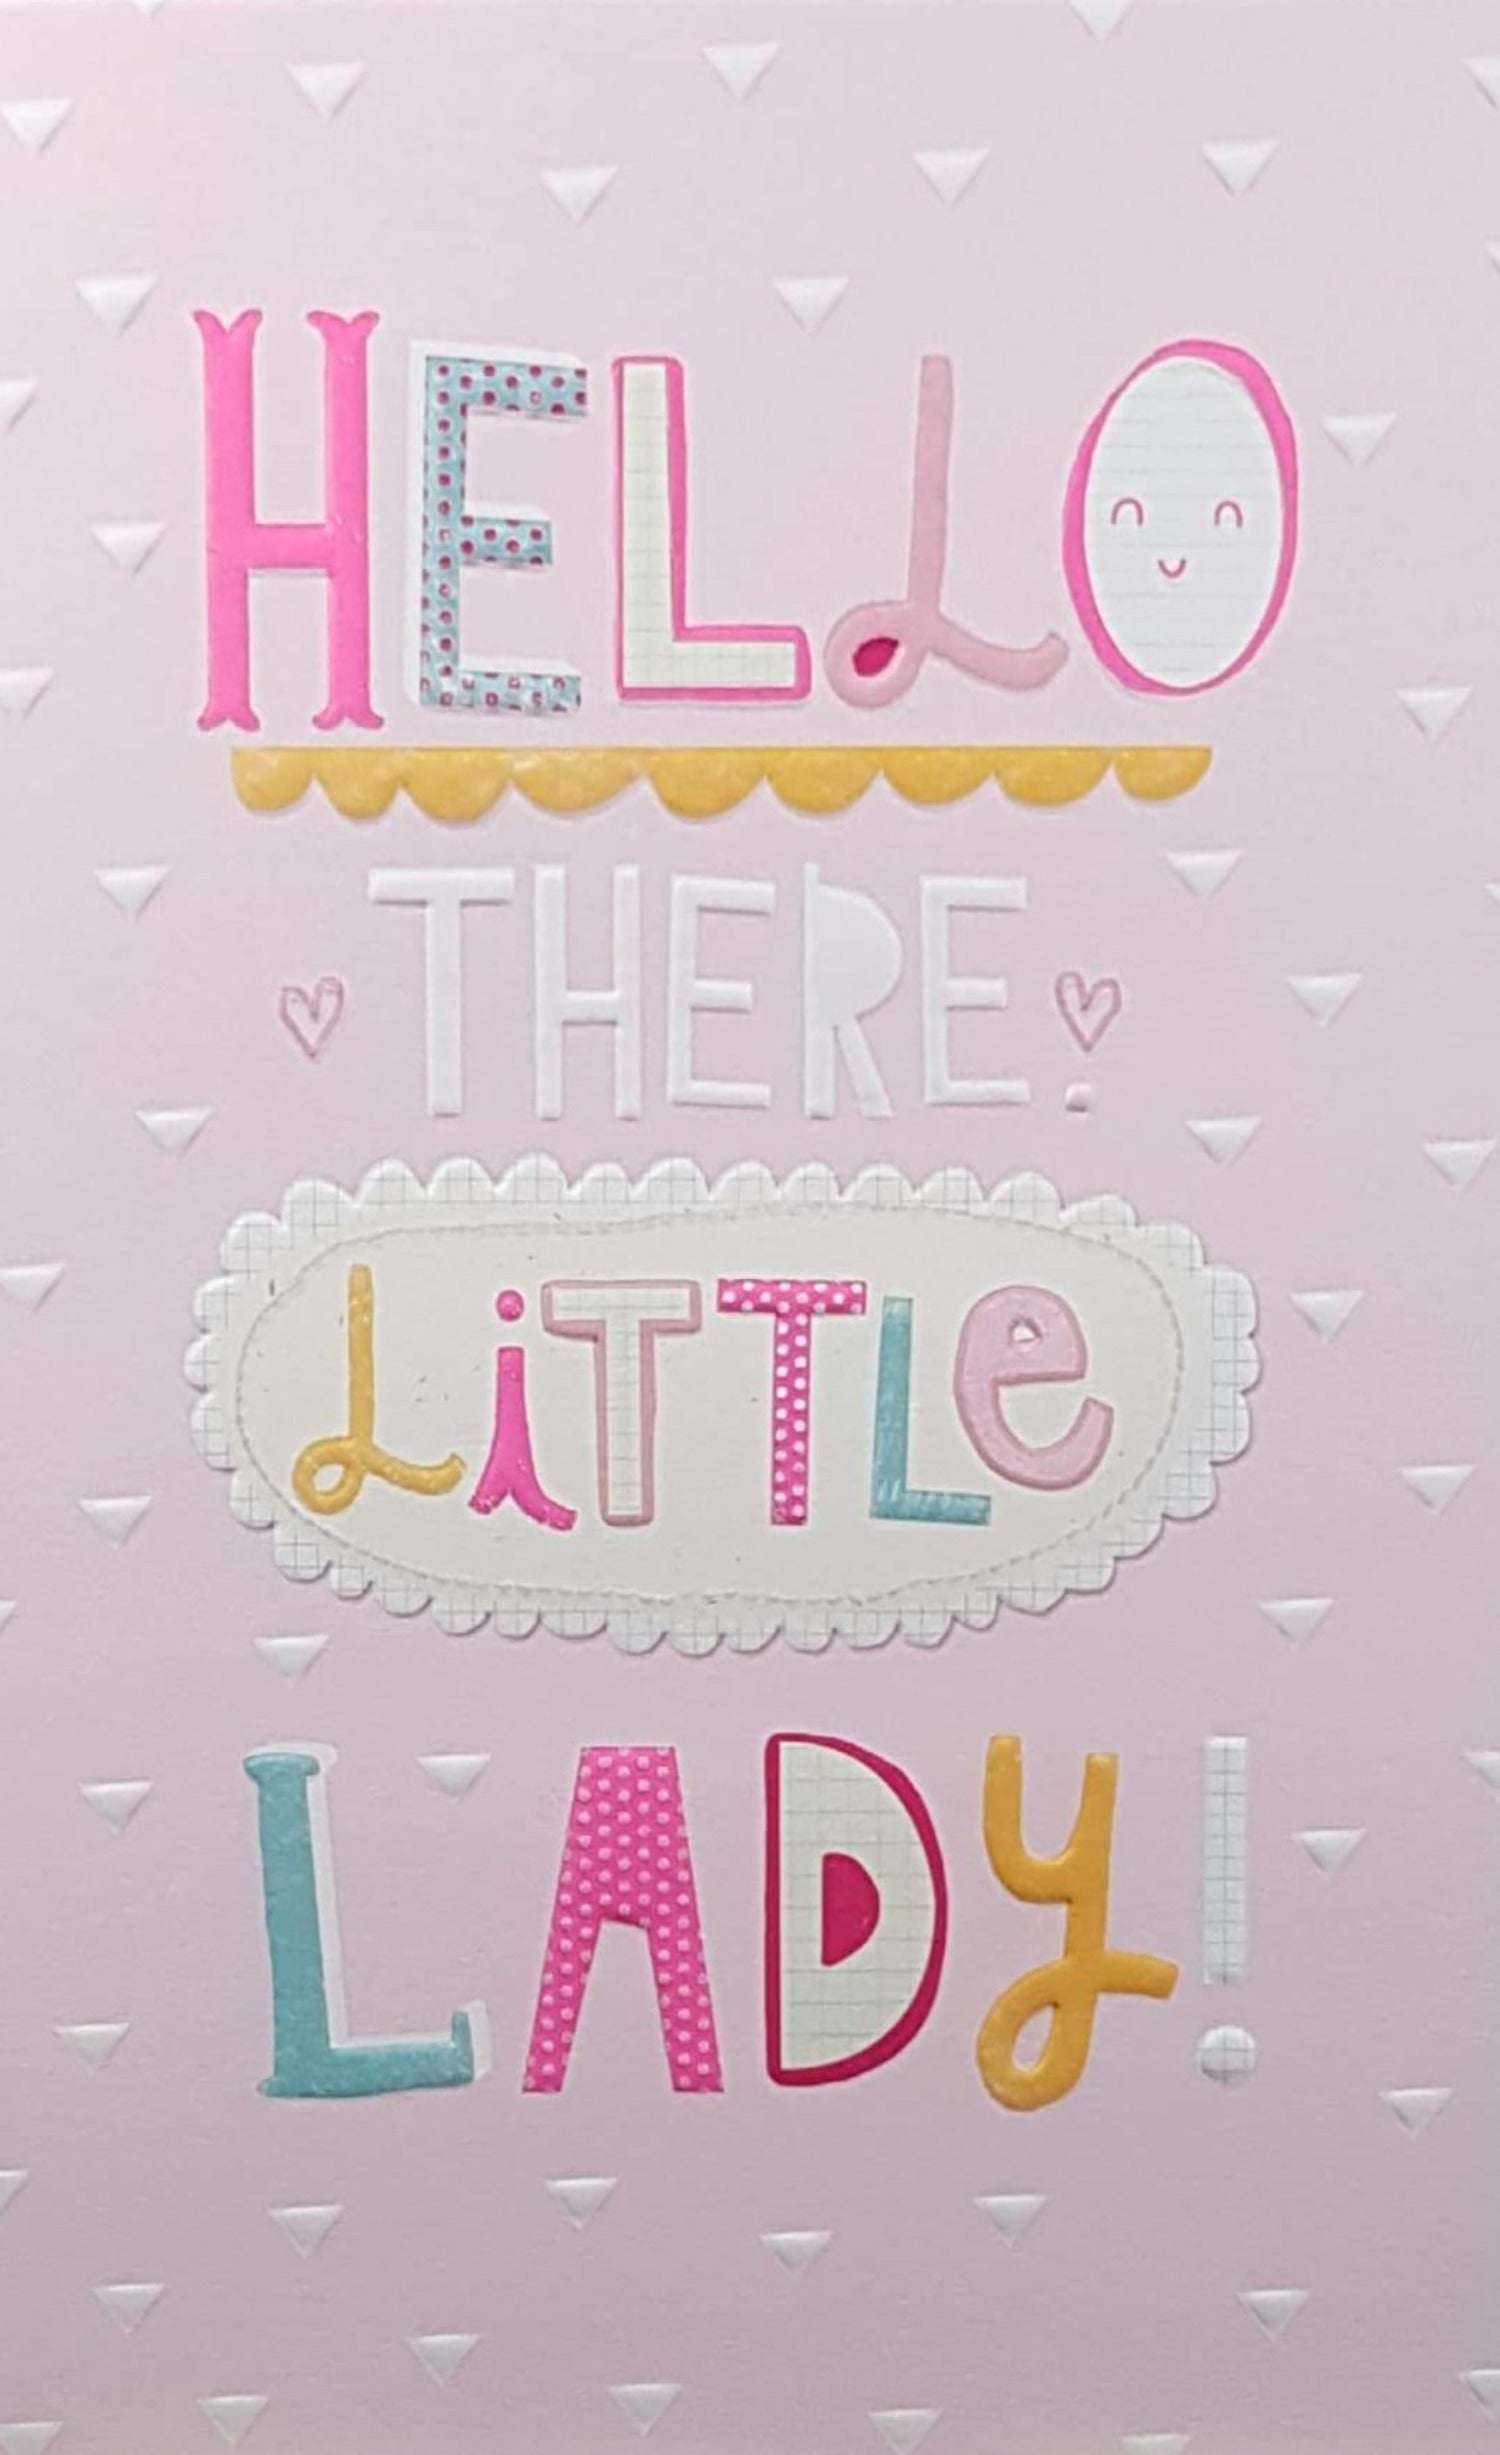 New Baby Card - Girl / Helo There Little Lady